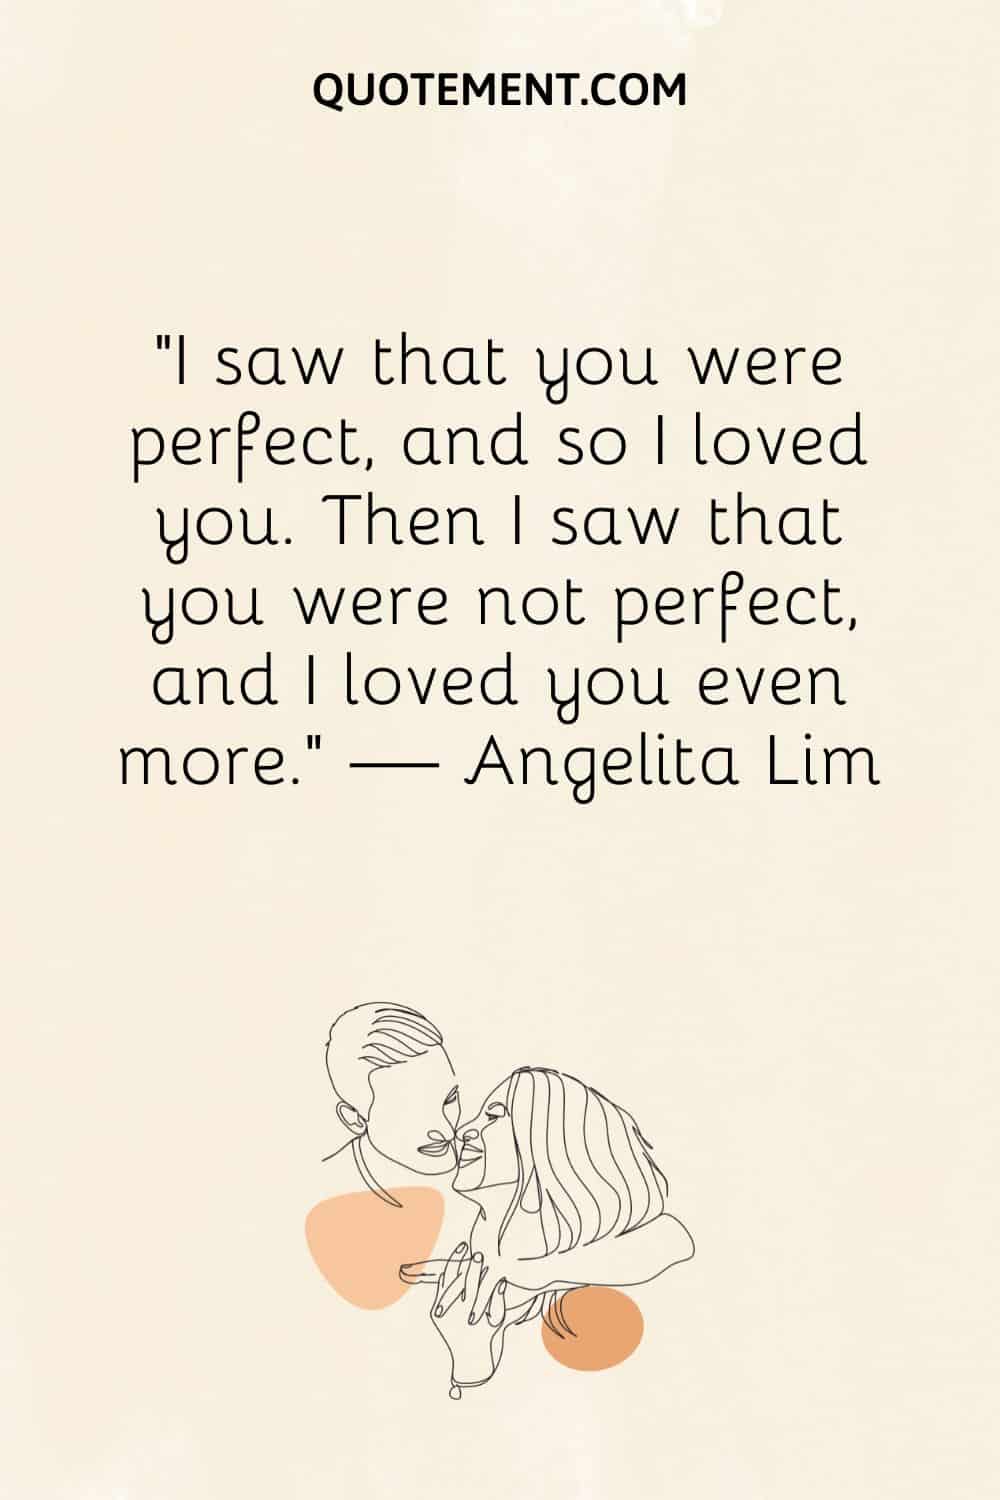 I saw that you were perfect, and so I loved you